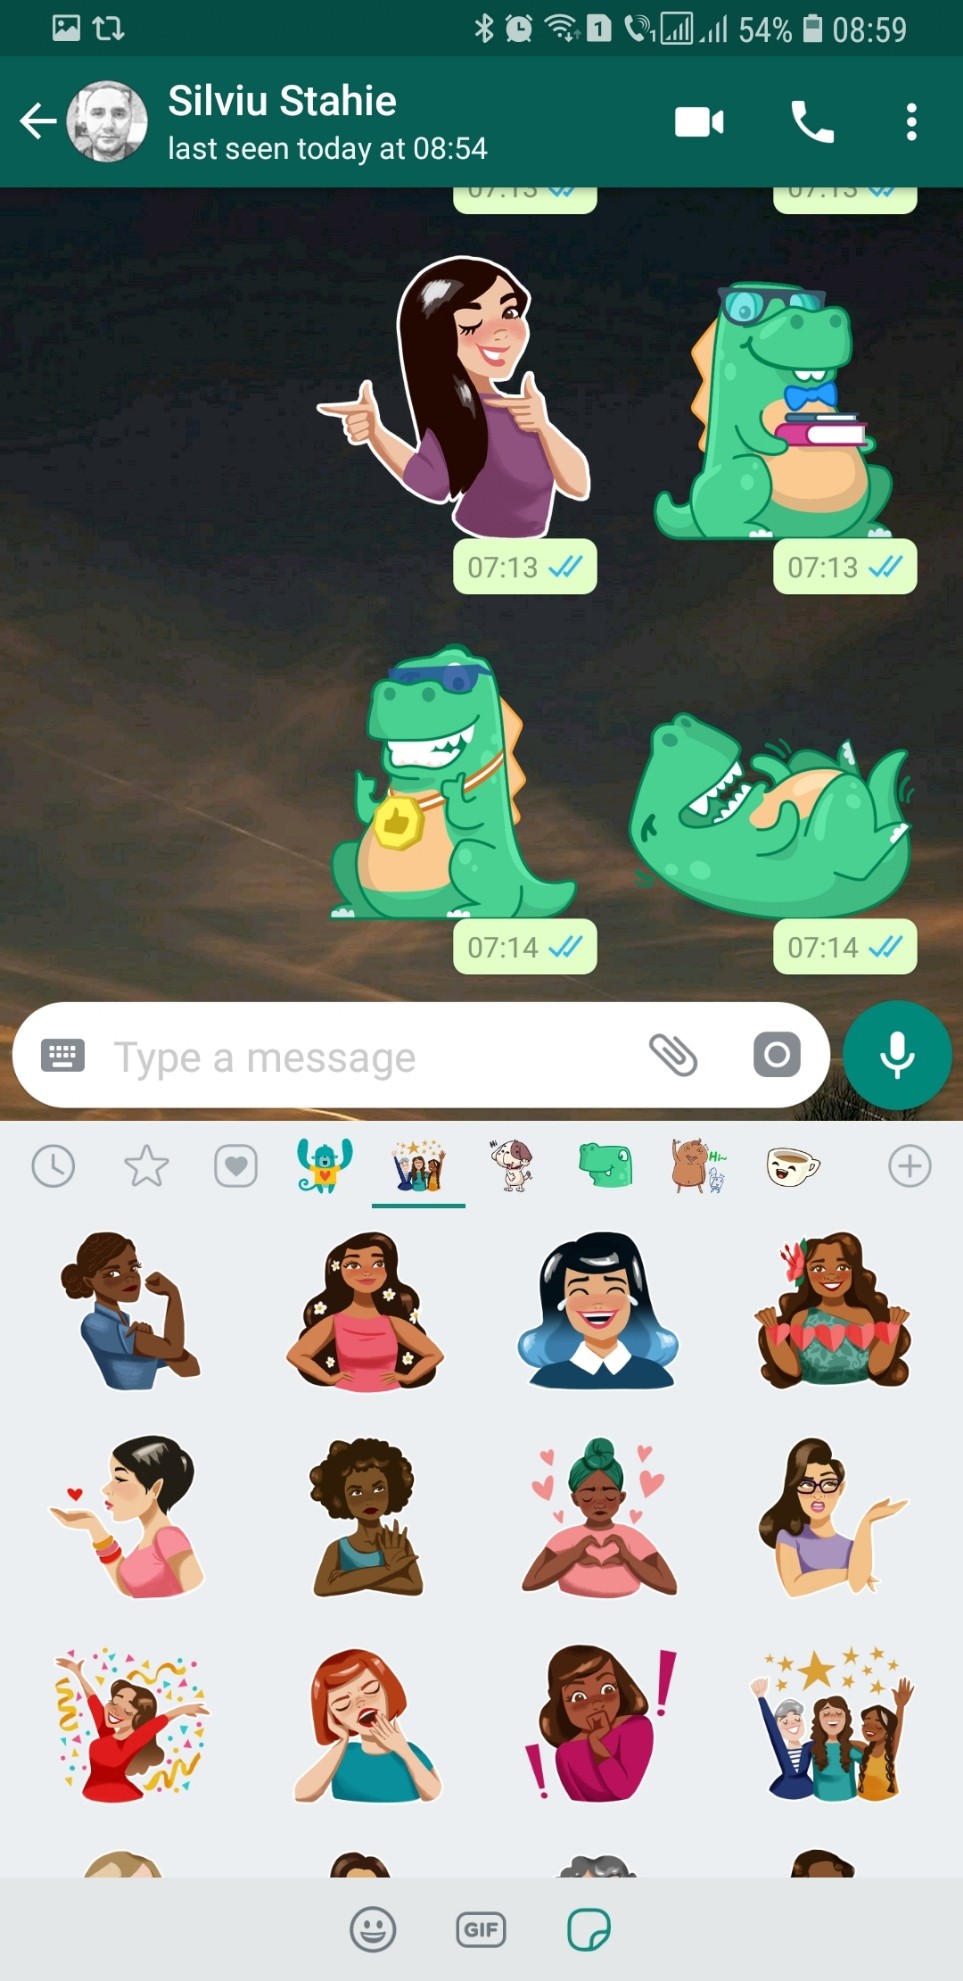 WhatsApp Officially Launches Stickers